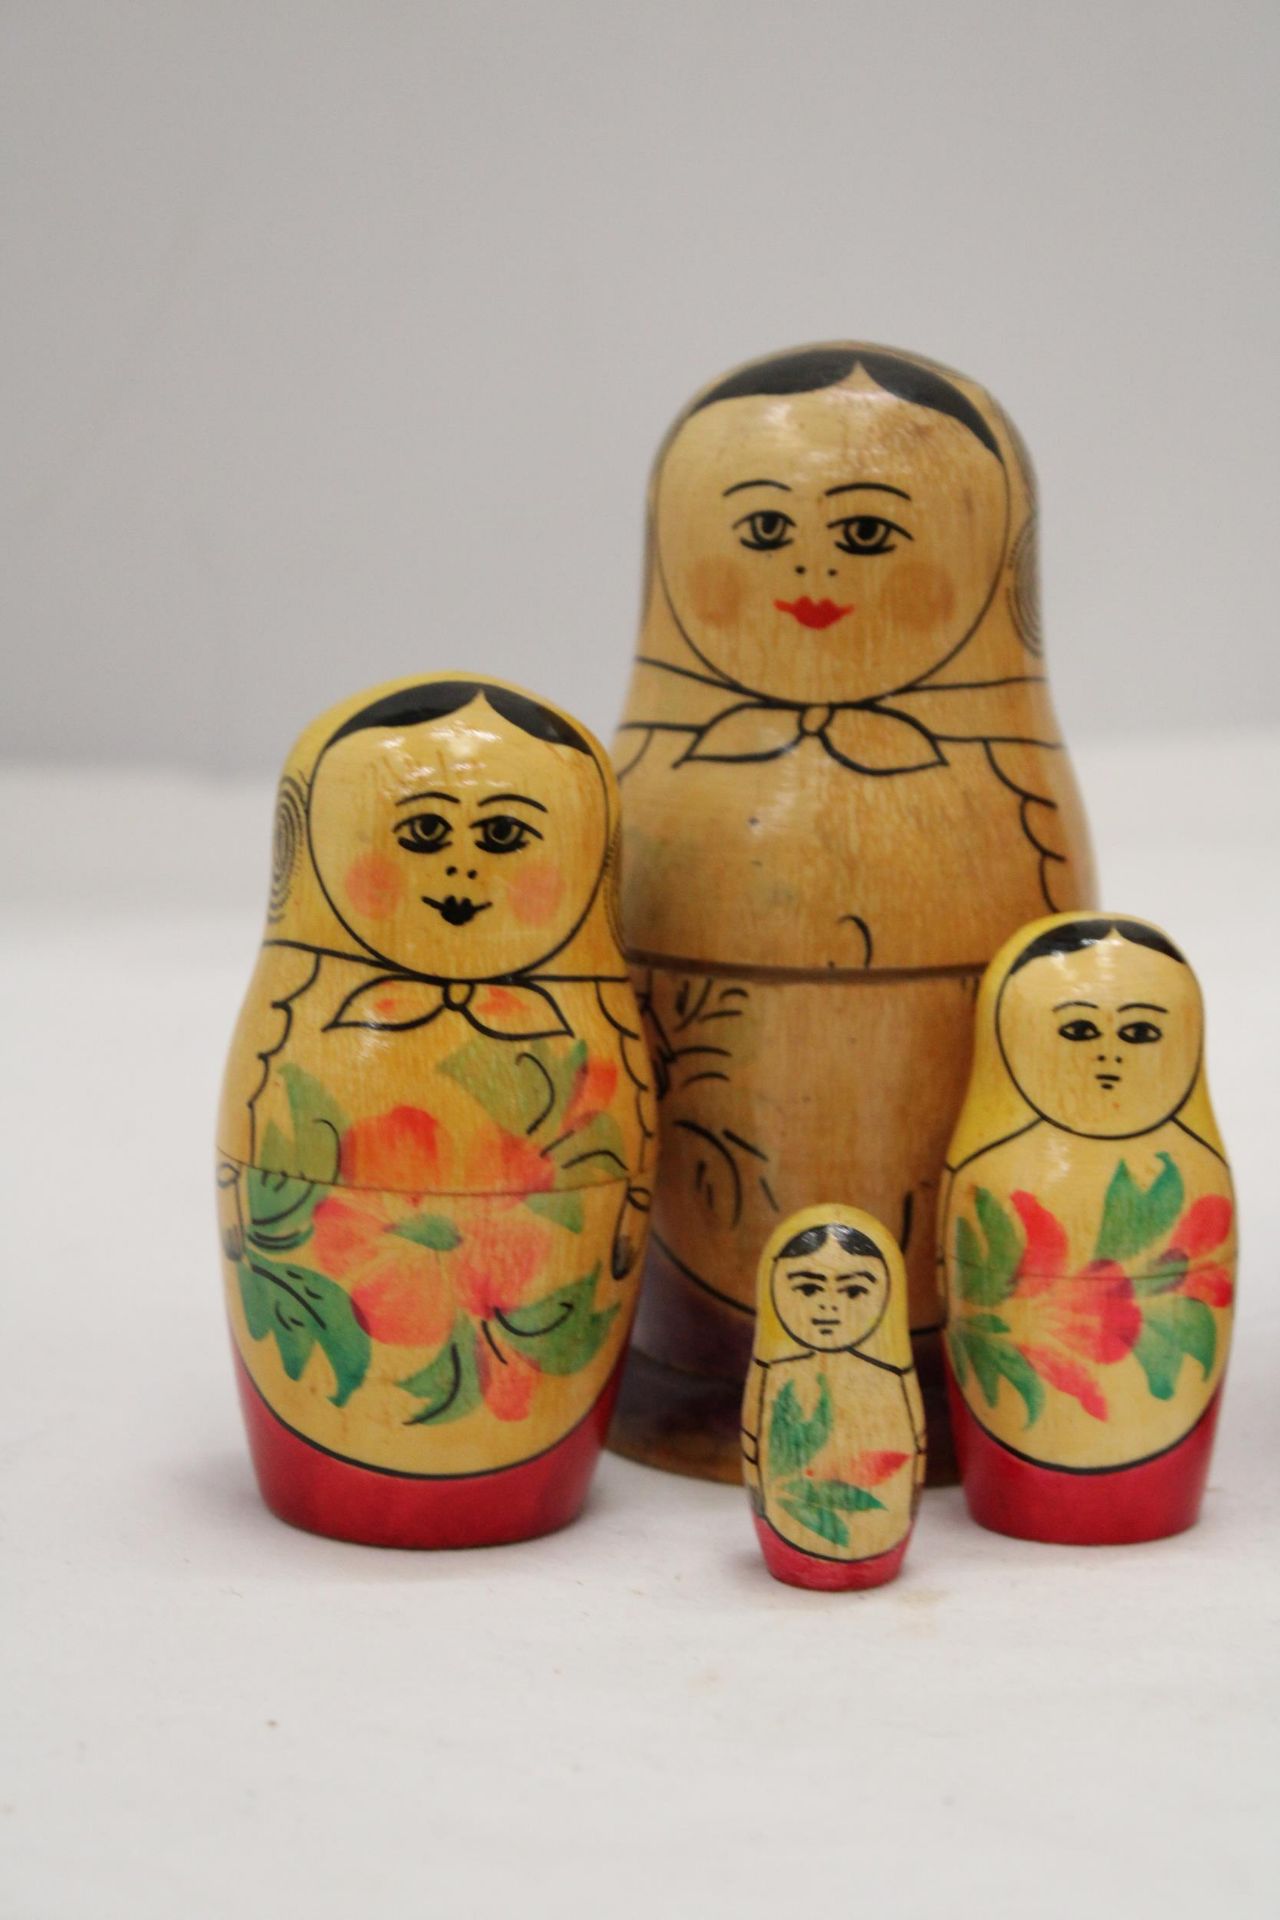 A RUSSIAN NESTING DOLL AND FATHER CHRISTMAS - Image 3 of 5